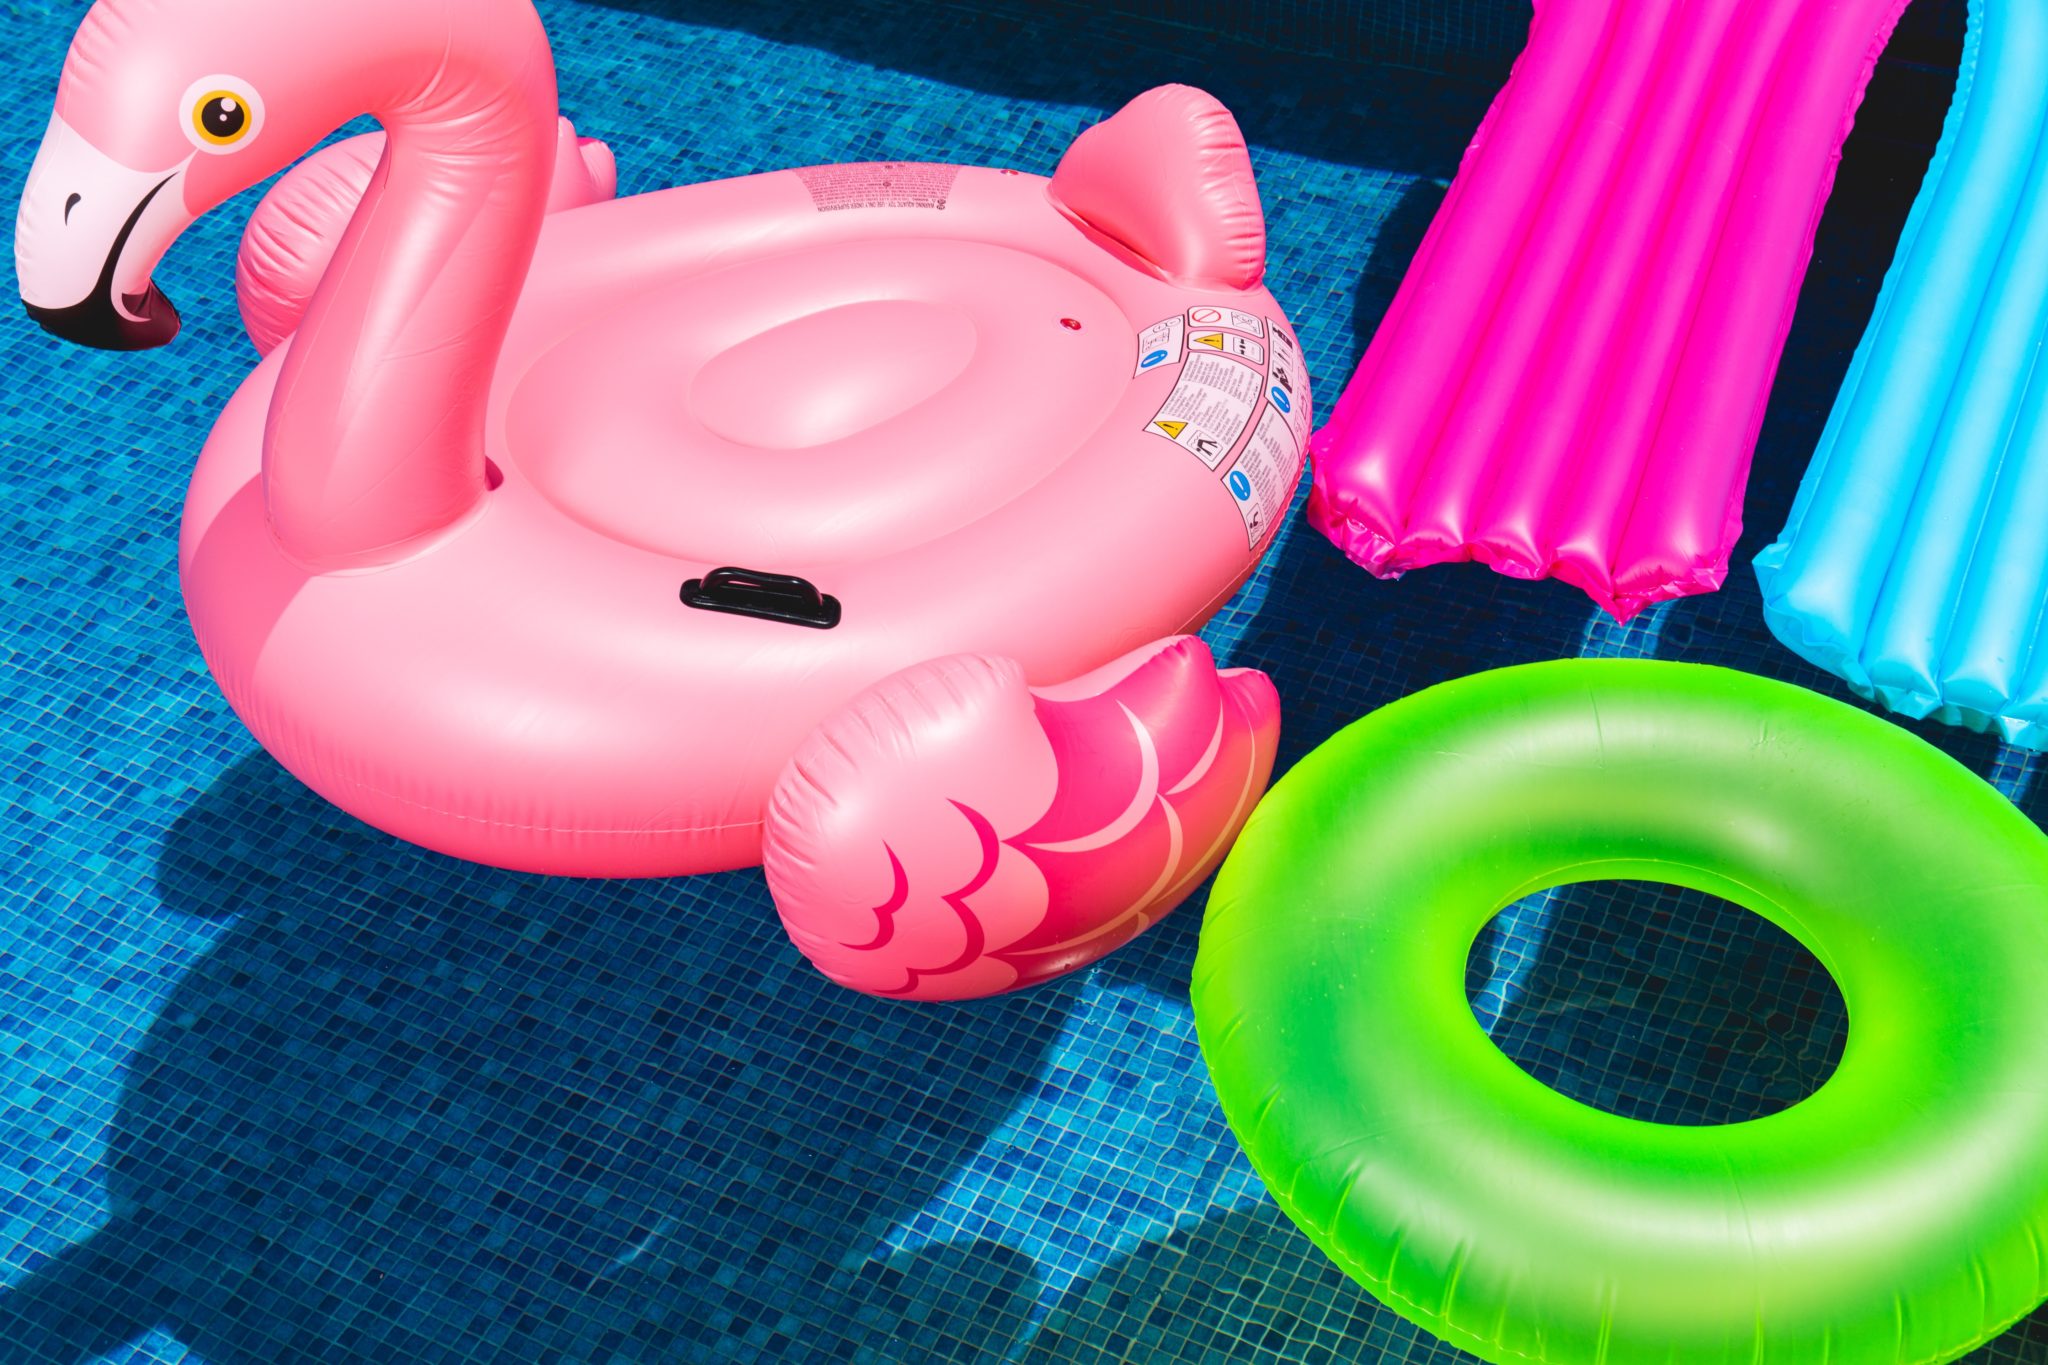 inflatables in the pool